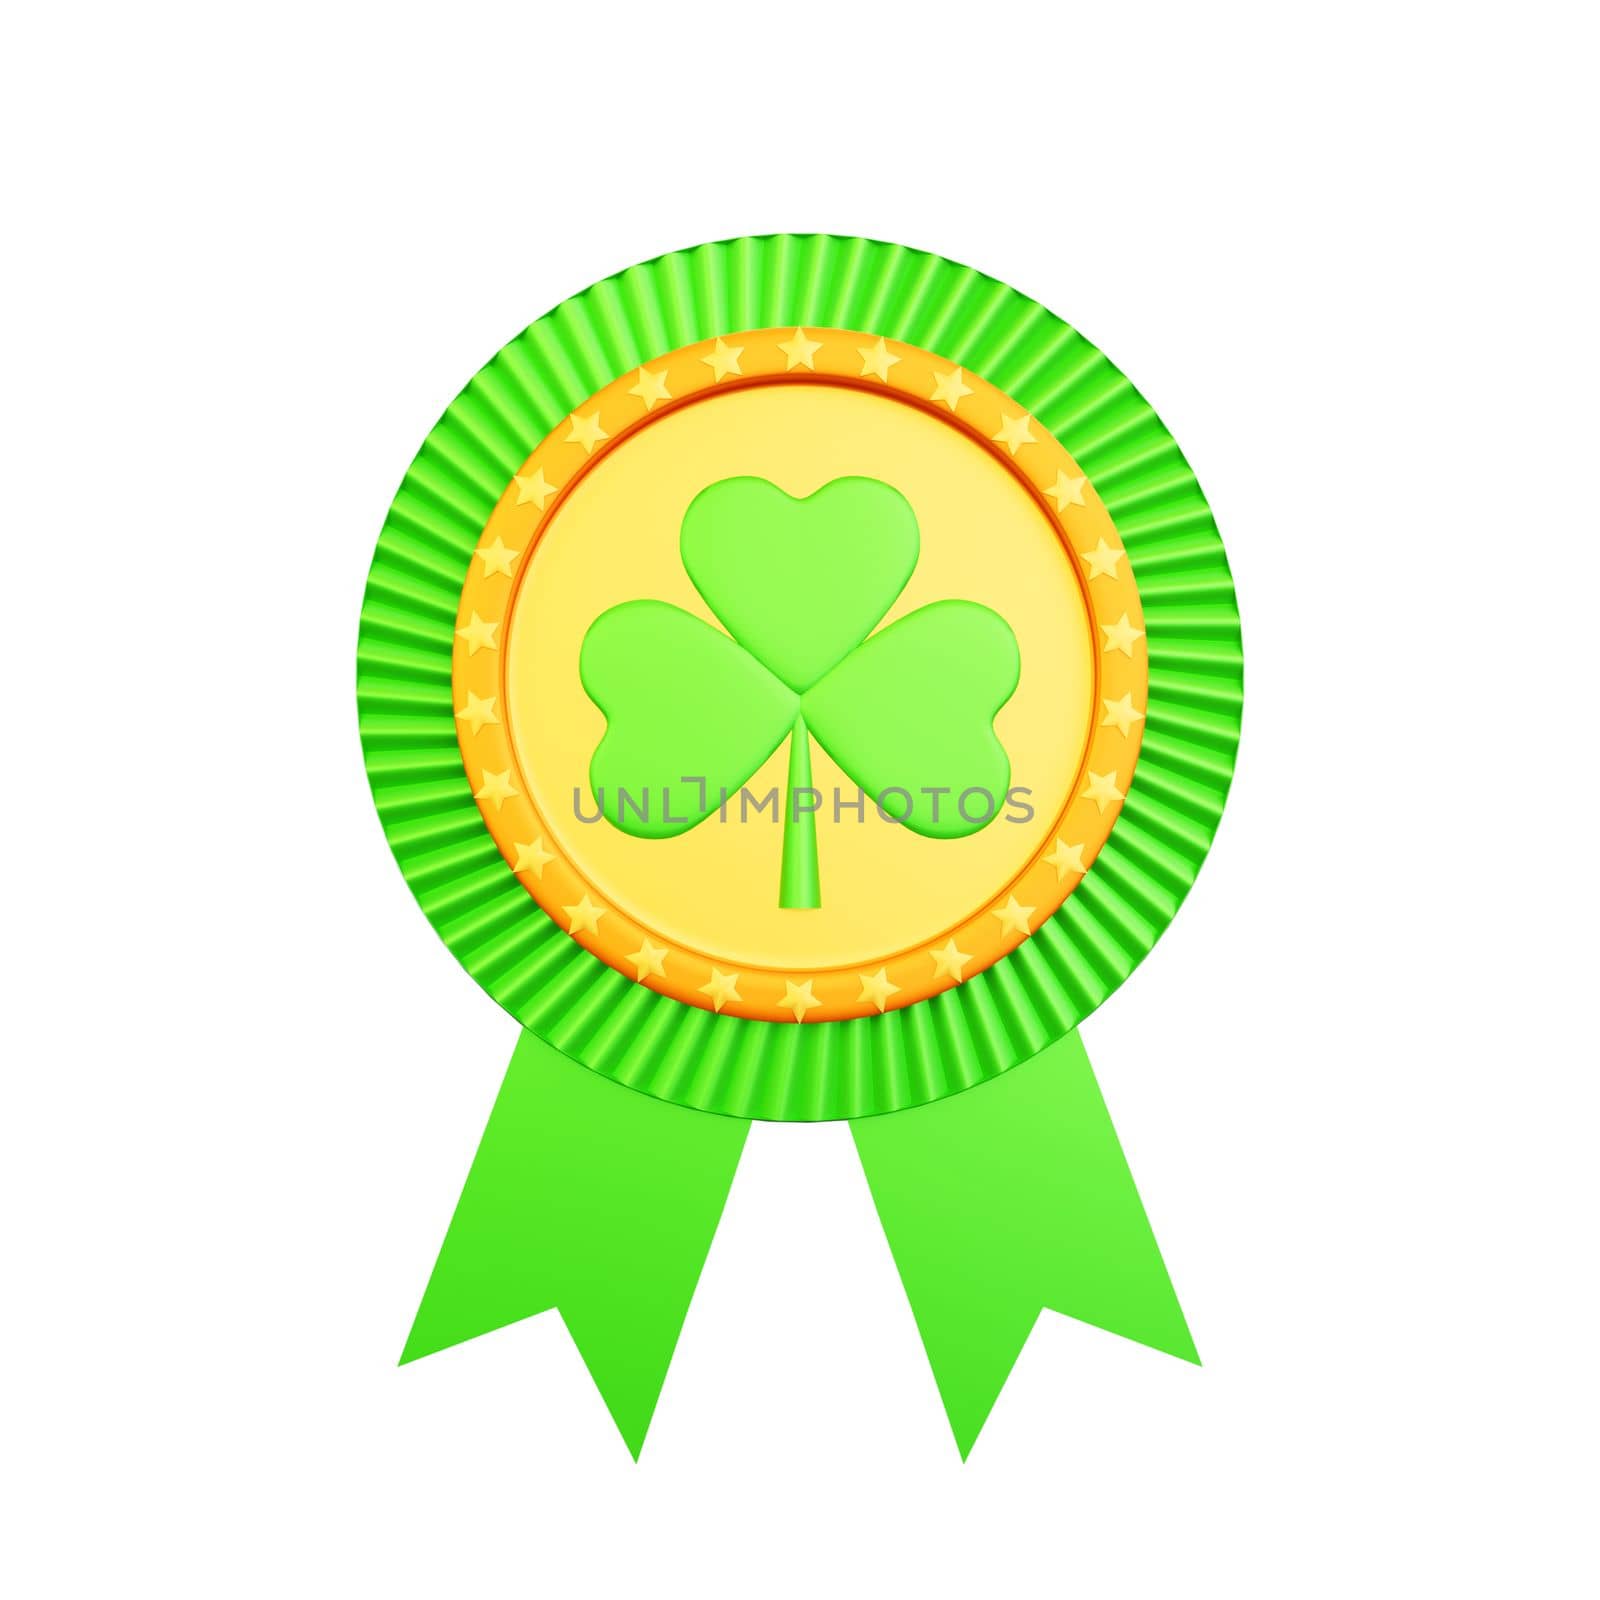 3d rendering of st patrick day award clover green ribbon icon